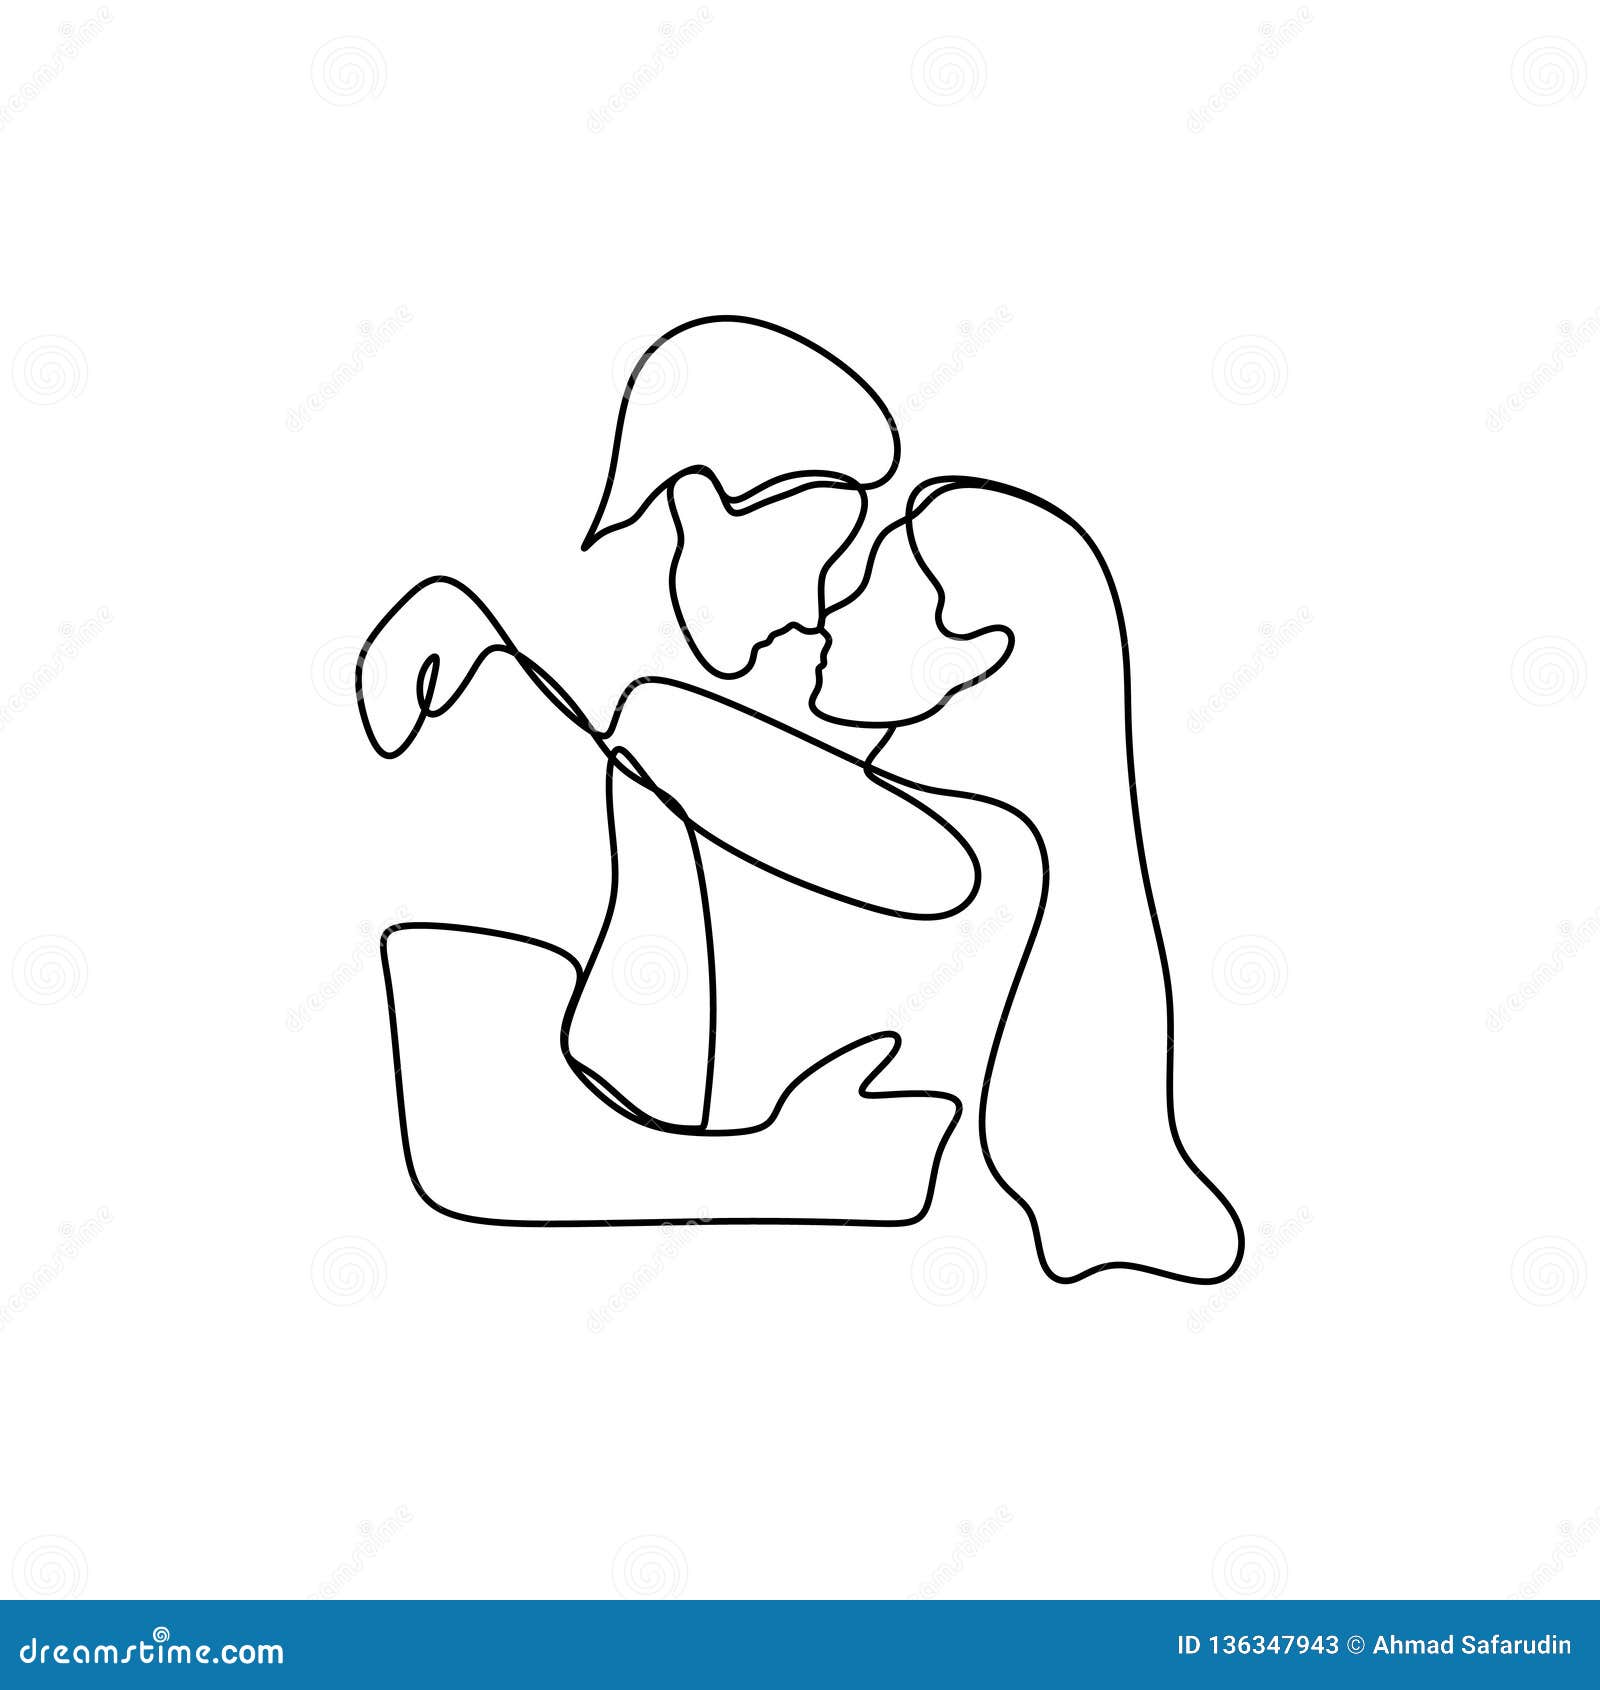 Featured image of post Cute Couple Drawings Easy Kiss / Couple kiss illustration, one line drawing printable art, intimate love line sketch, minimalist kissing wall art.